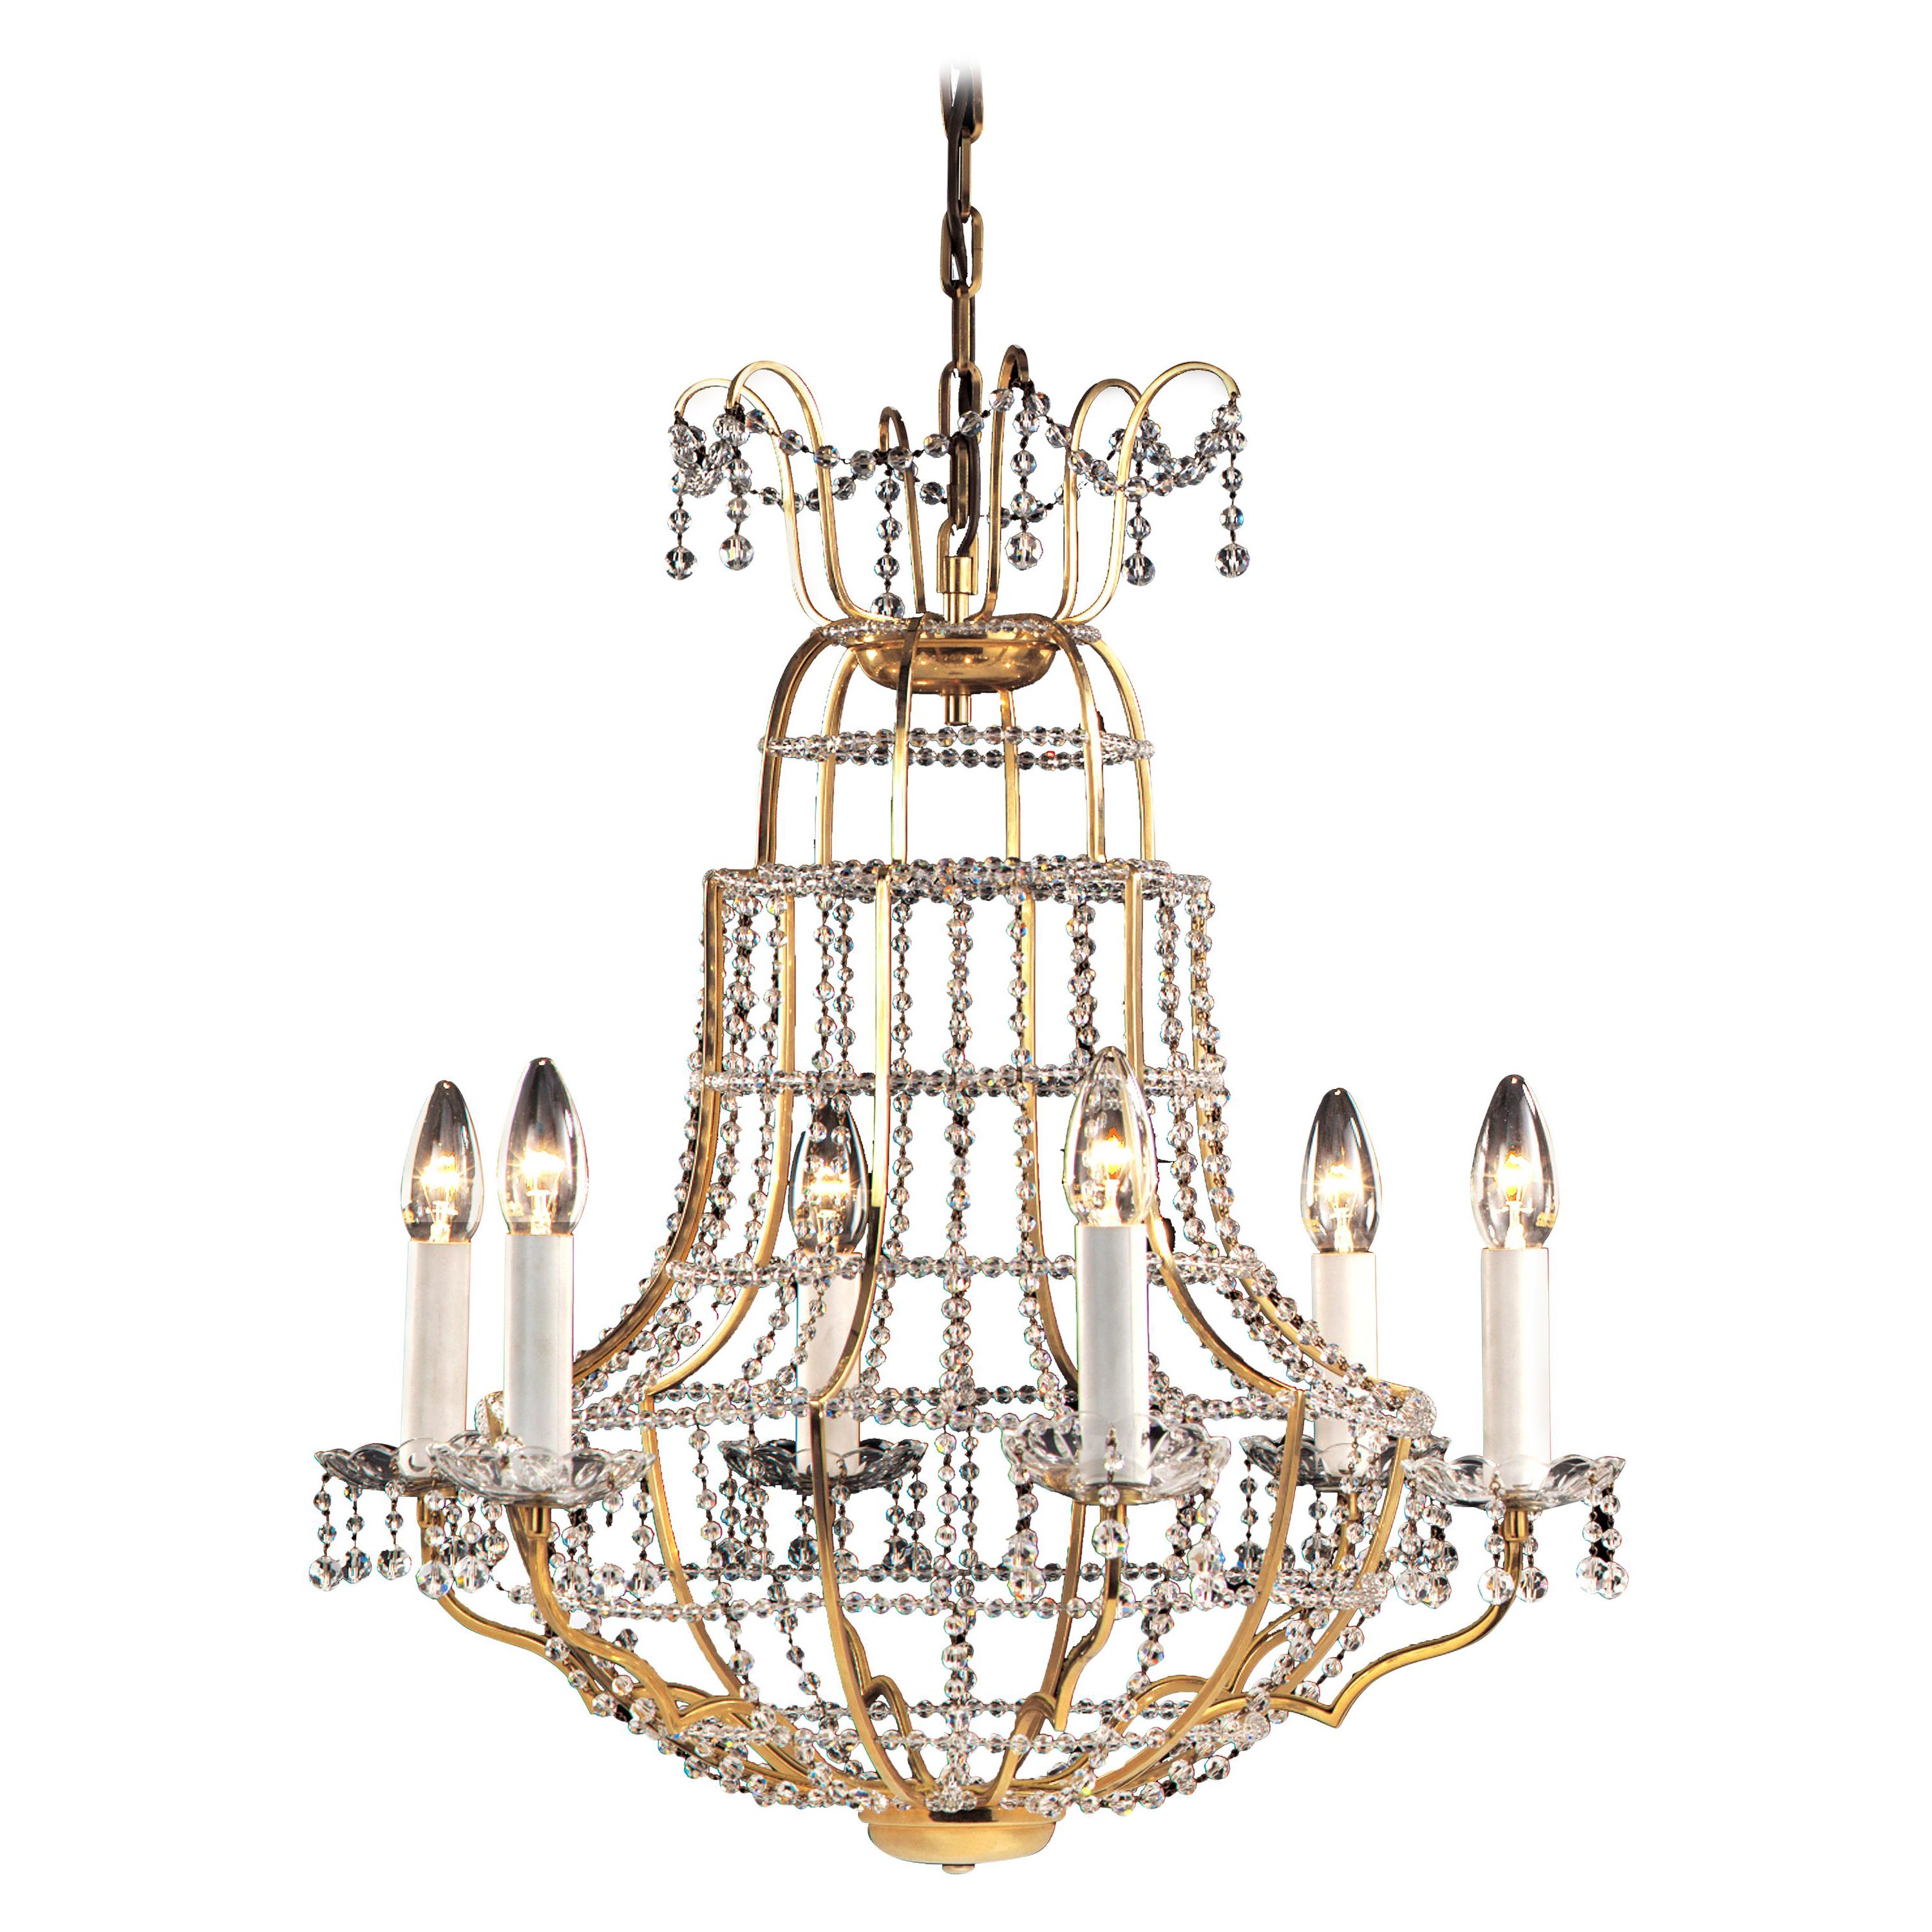 Midcentury Modern Style "Papageno" Crystal Chandelier -  Bespoke For Sale